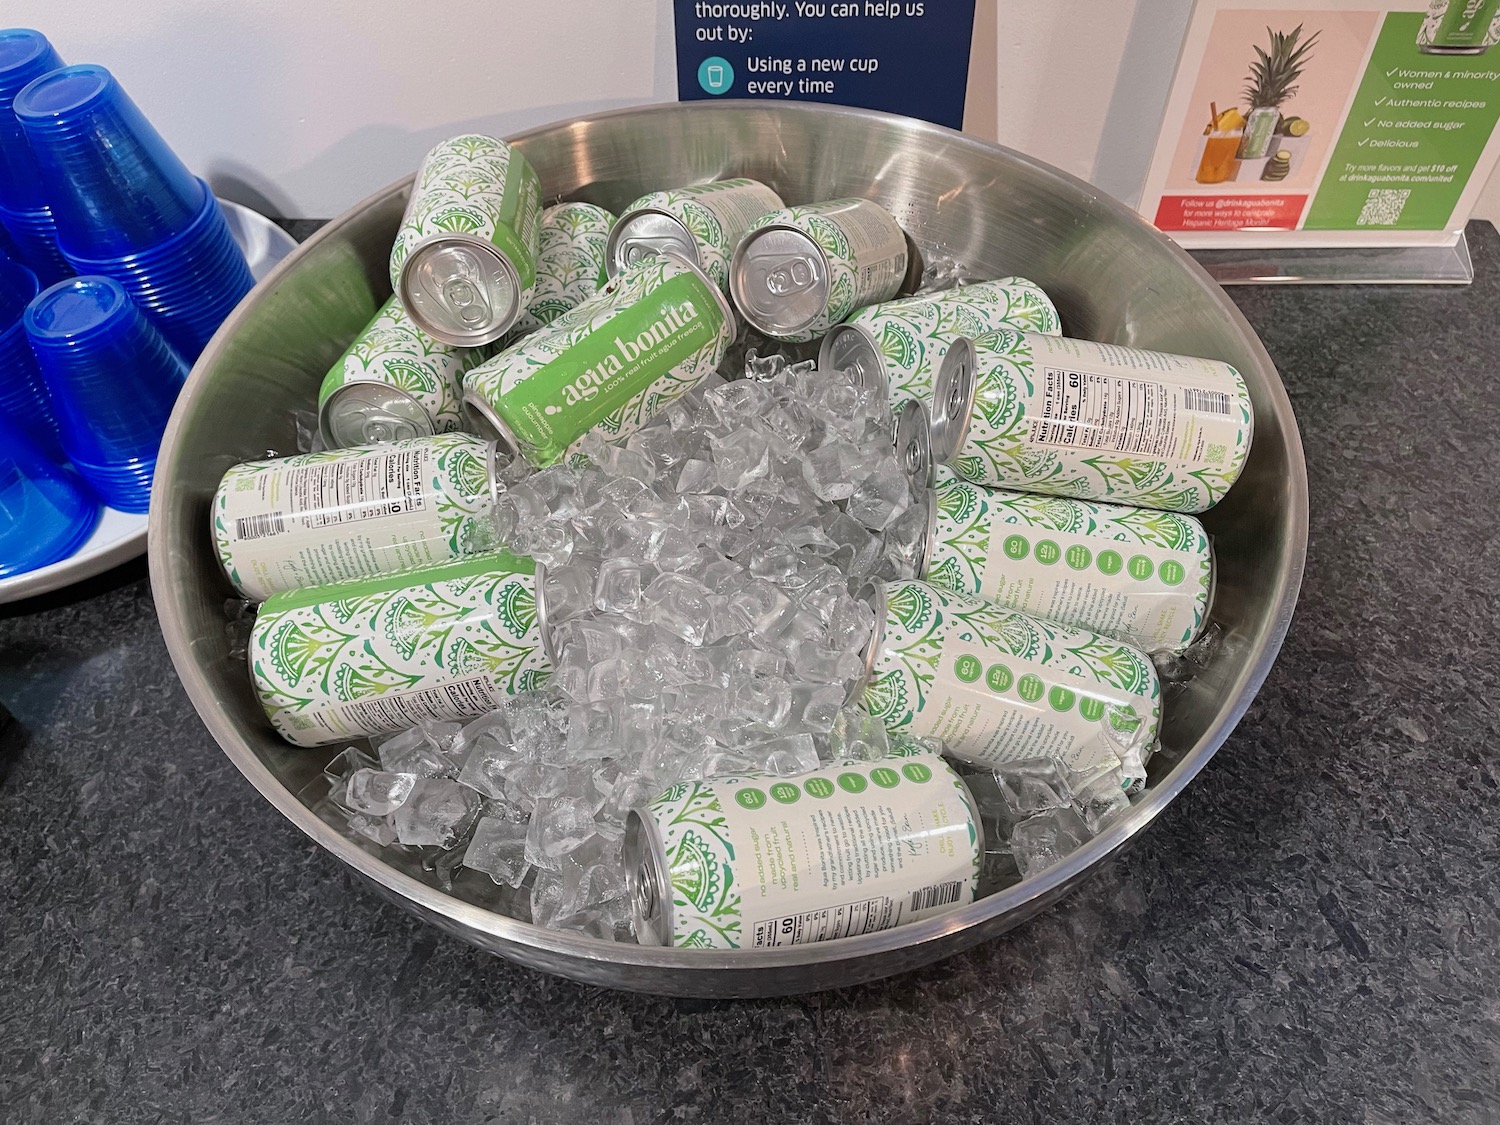 a bowl of cans and ice